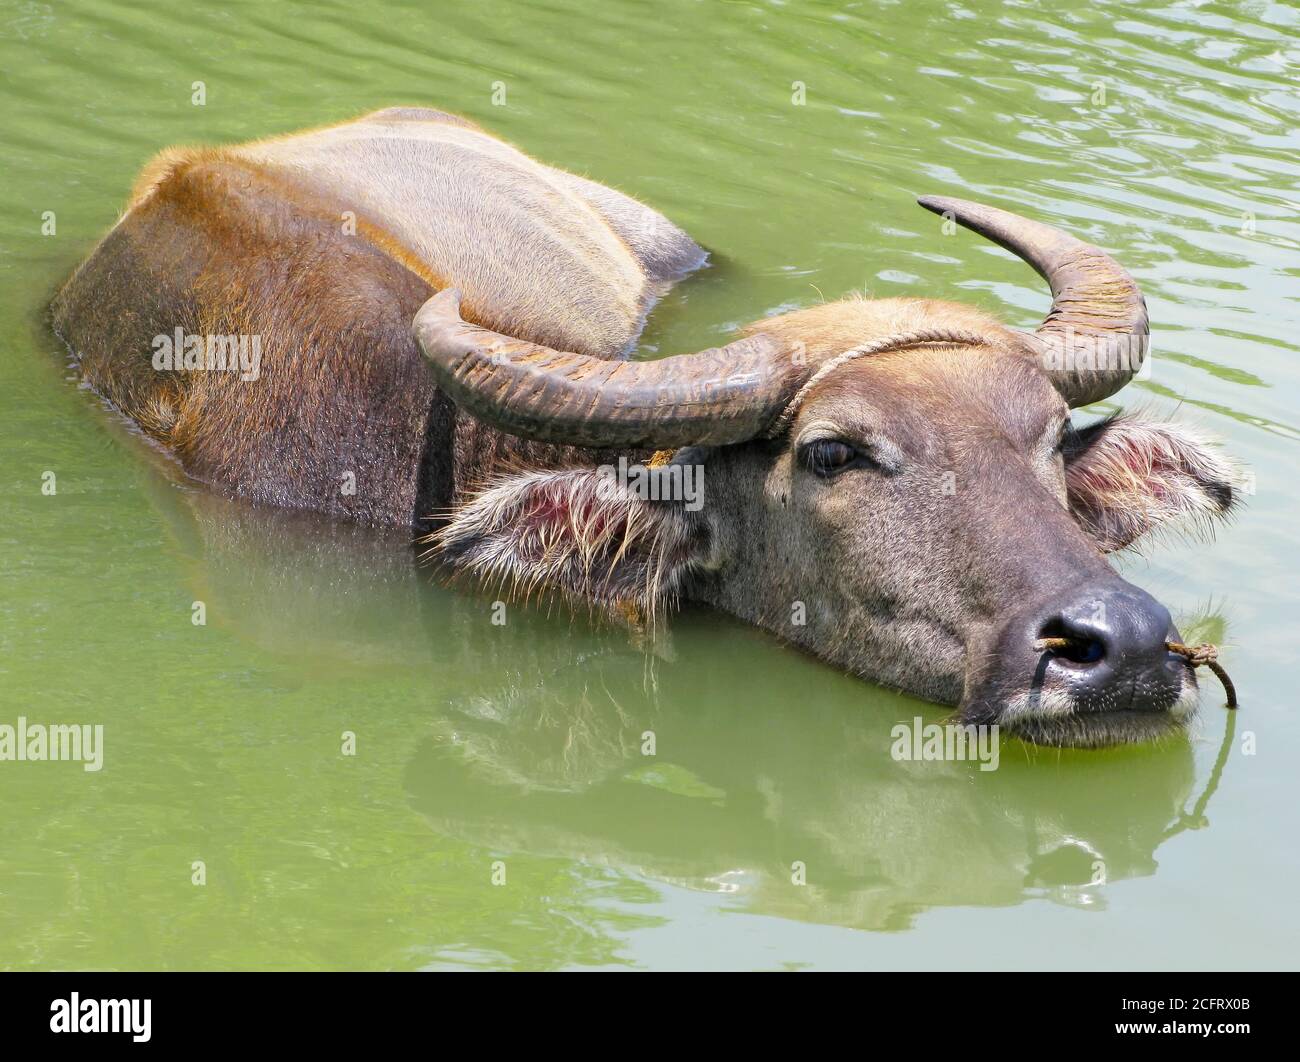 Close-up portrait of a big water buffalo carabao standing in a pool of water for cooling, Luzon, Philippines Stock Photo